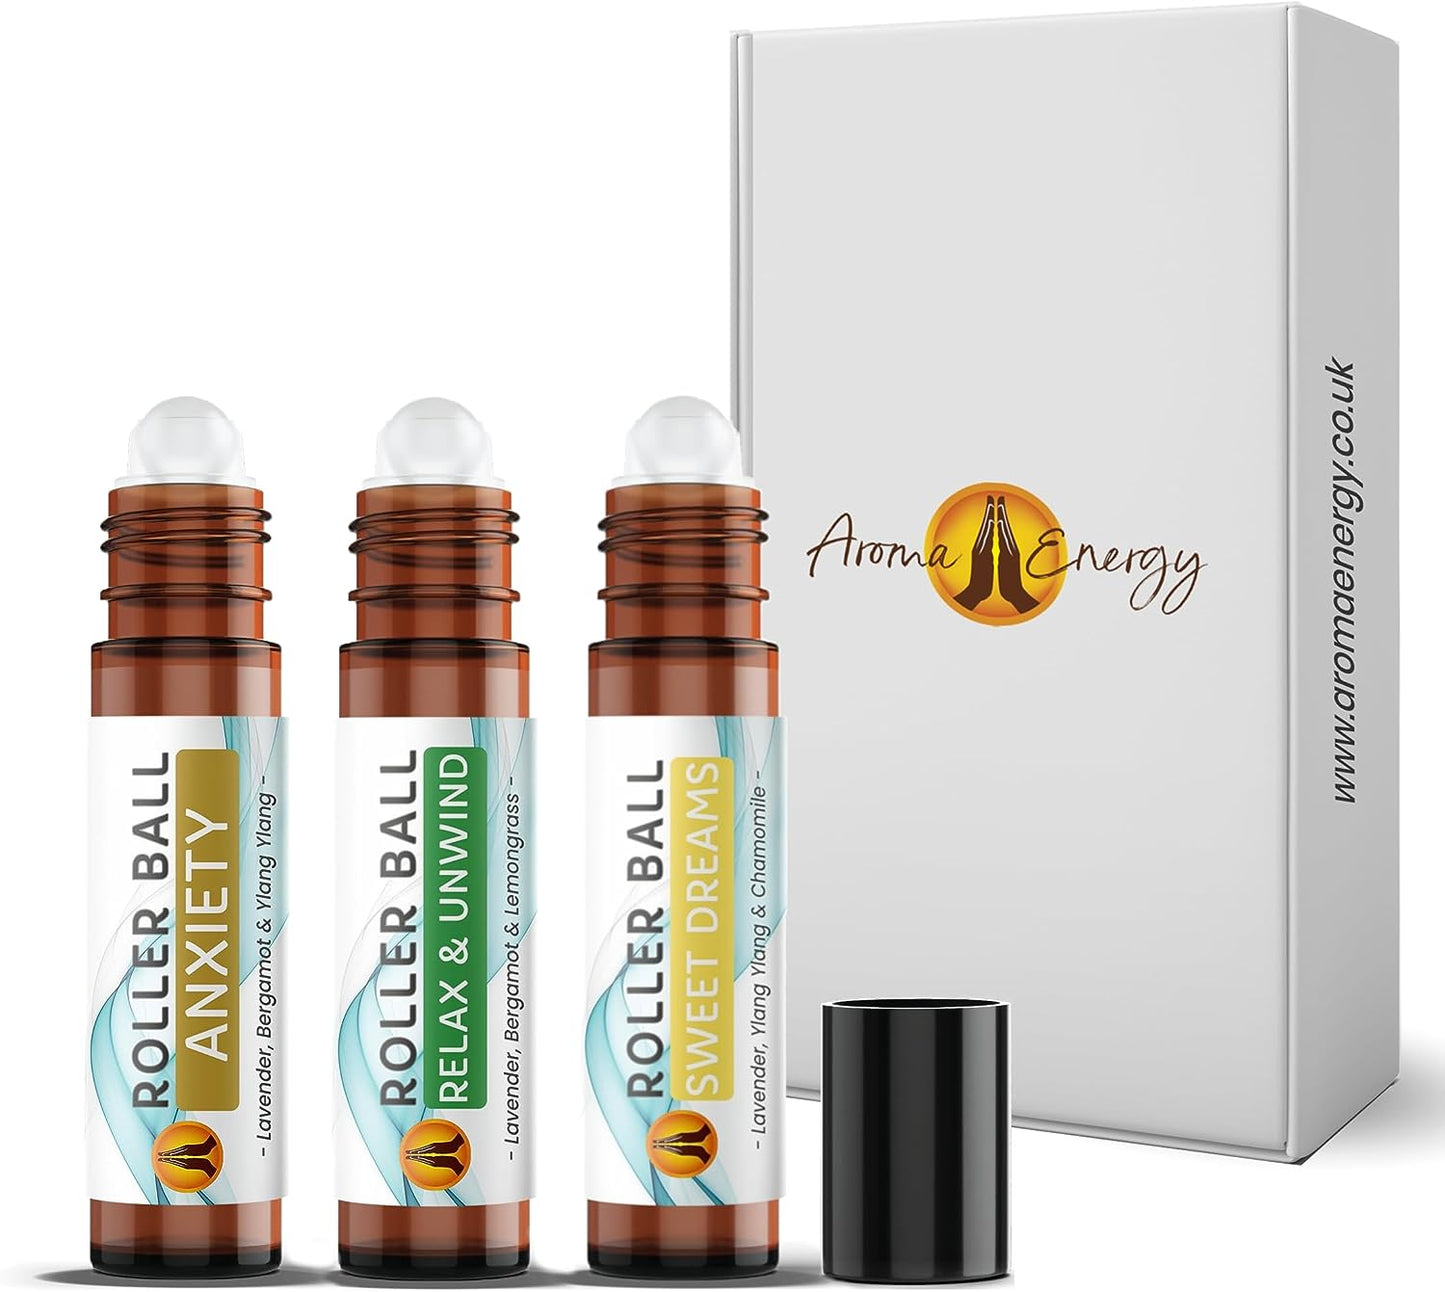 Anxiety Relief Roller Ball Gift Box Set | Essential Oil Roller Ball | Aromatherapy - Aroma Energy